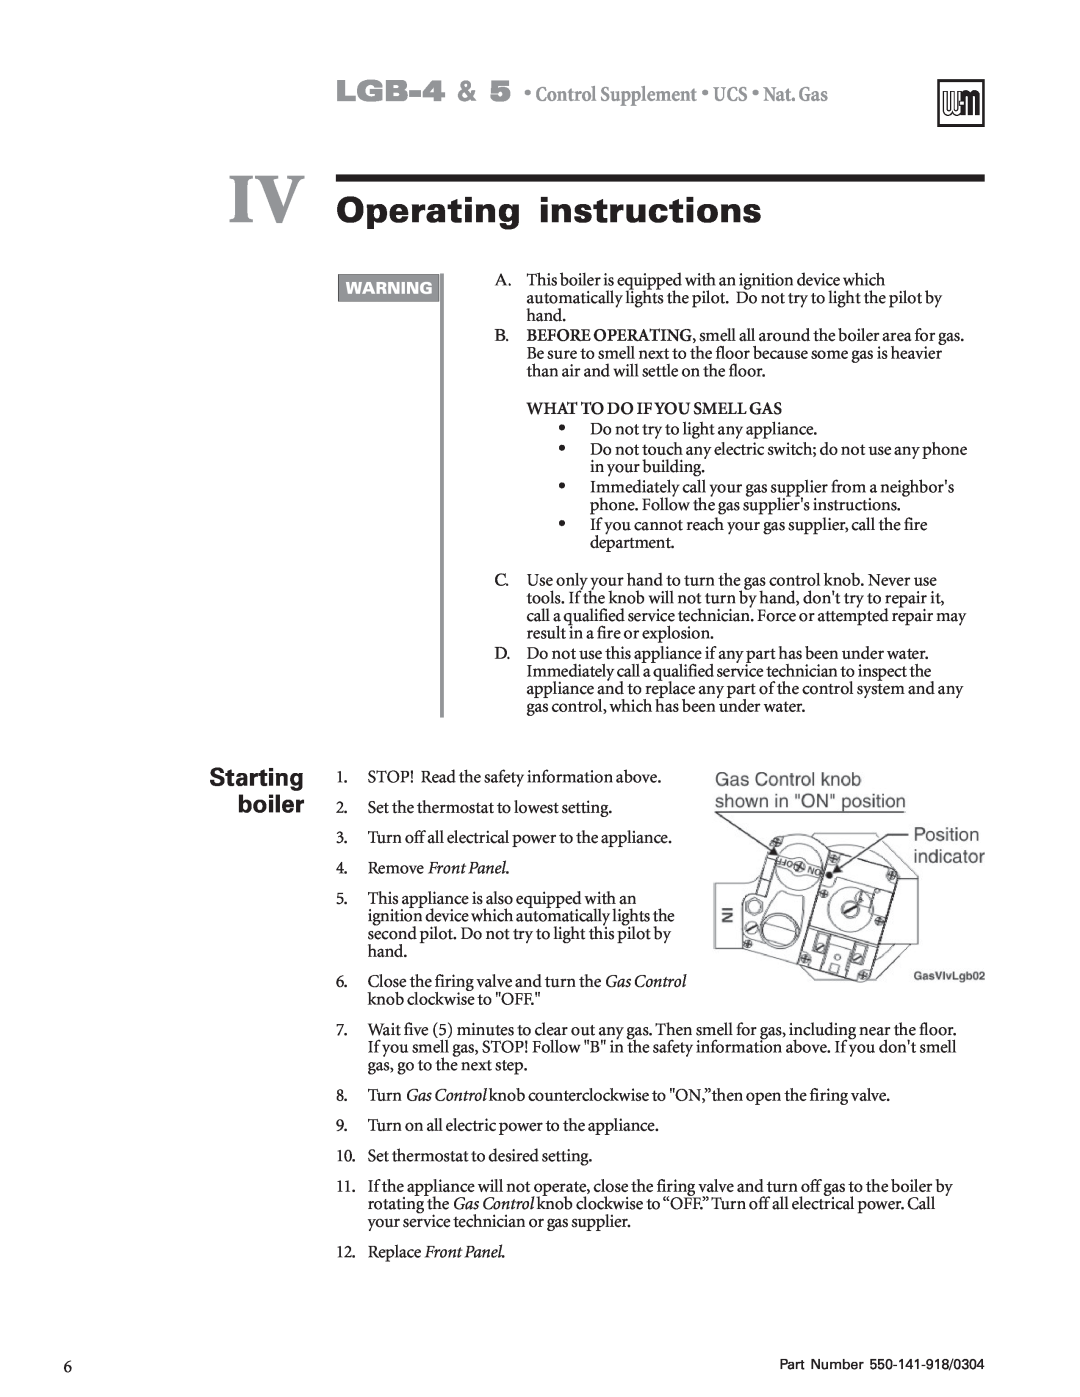 Weil-McLain LGB-5, LGB-4 IV Operating instructions, Starting boiler, What To Do If You Smell Gas, Remove Front Panel 